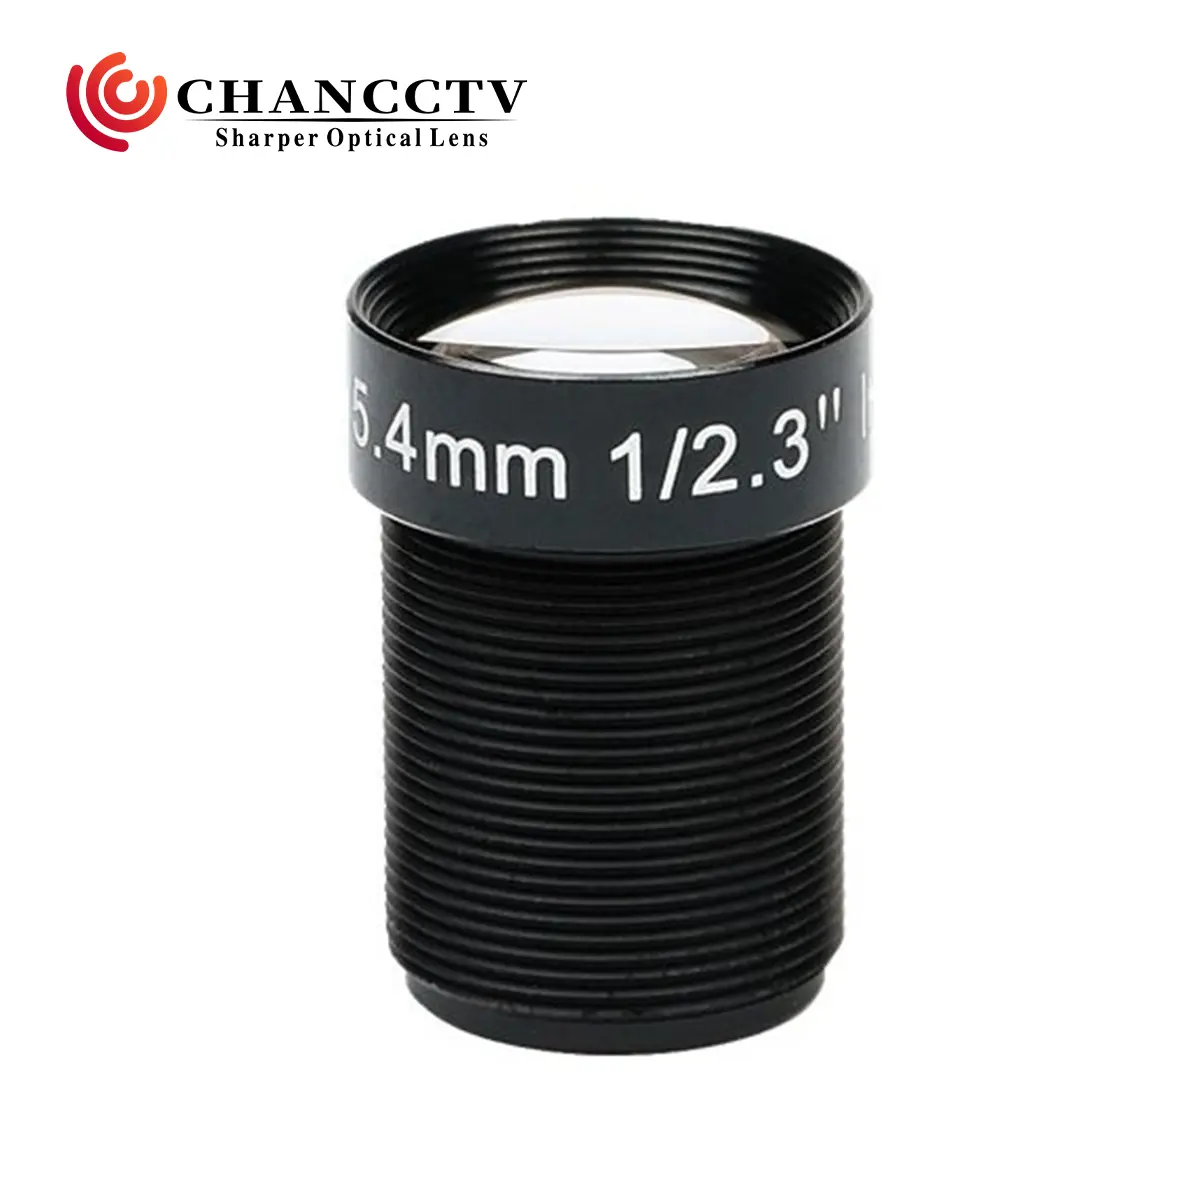 1/2.3'' 10MP 5.4mm F2.5 Low Distortion M12 Lens with IR Cut Filter